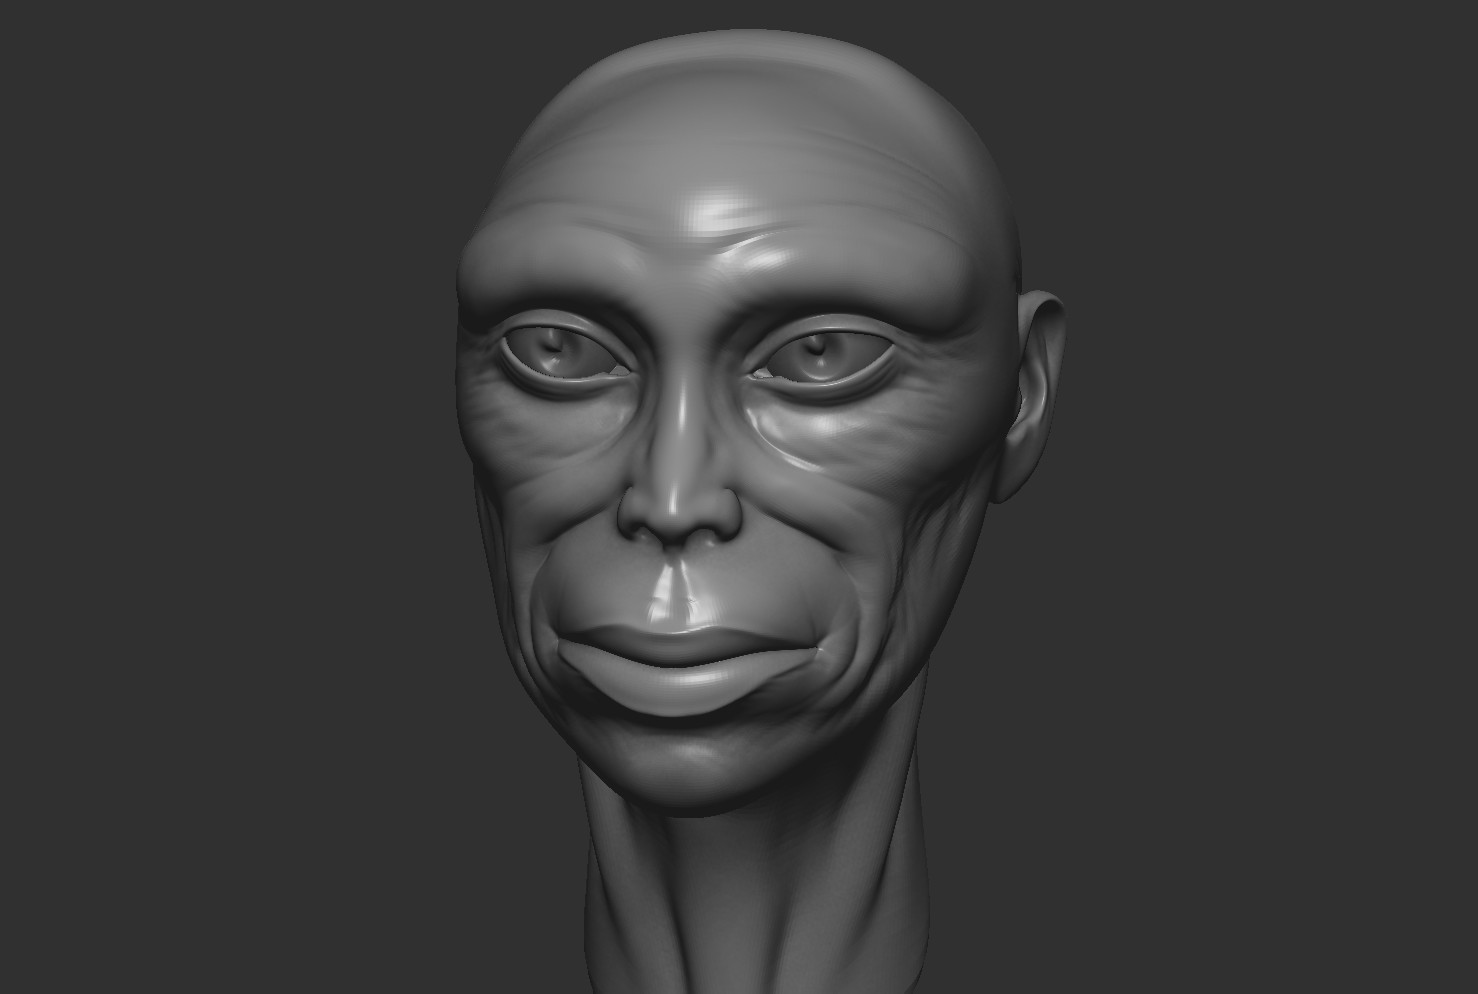 Another 1 hour sculpt in ZBrush.